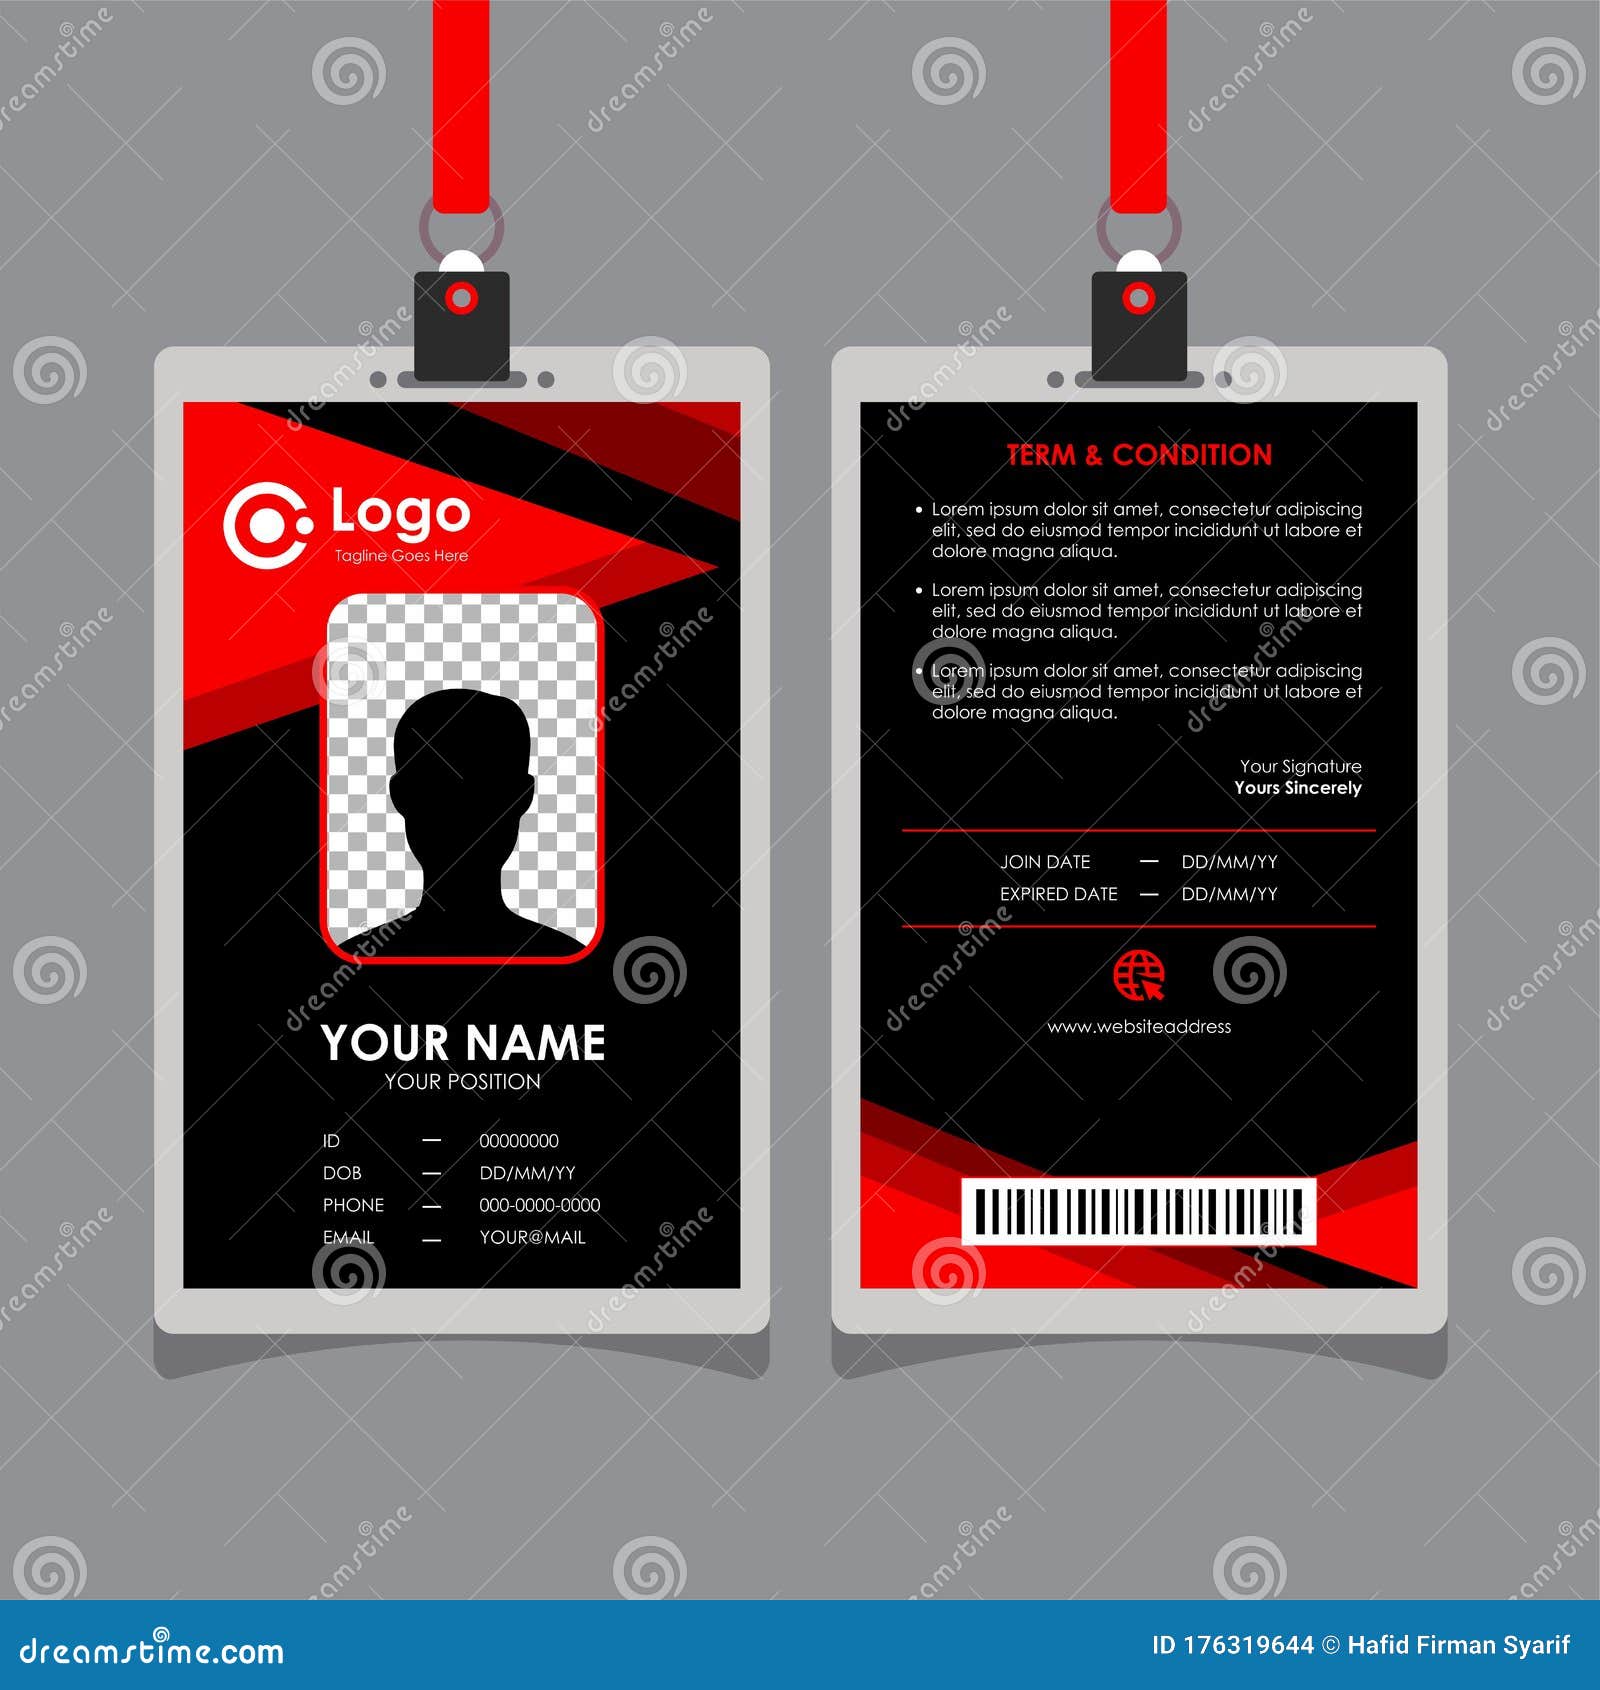 Premium Vector  Modern and clean business id card template design